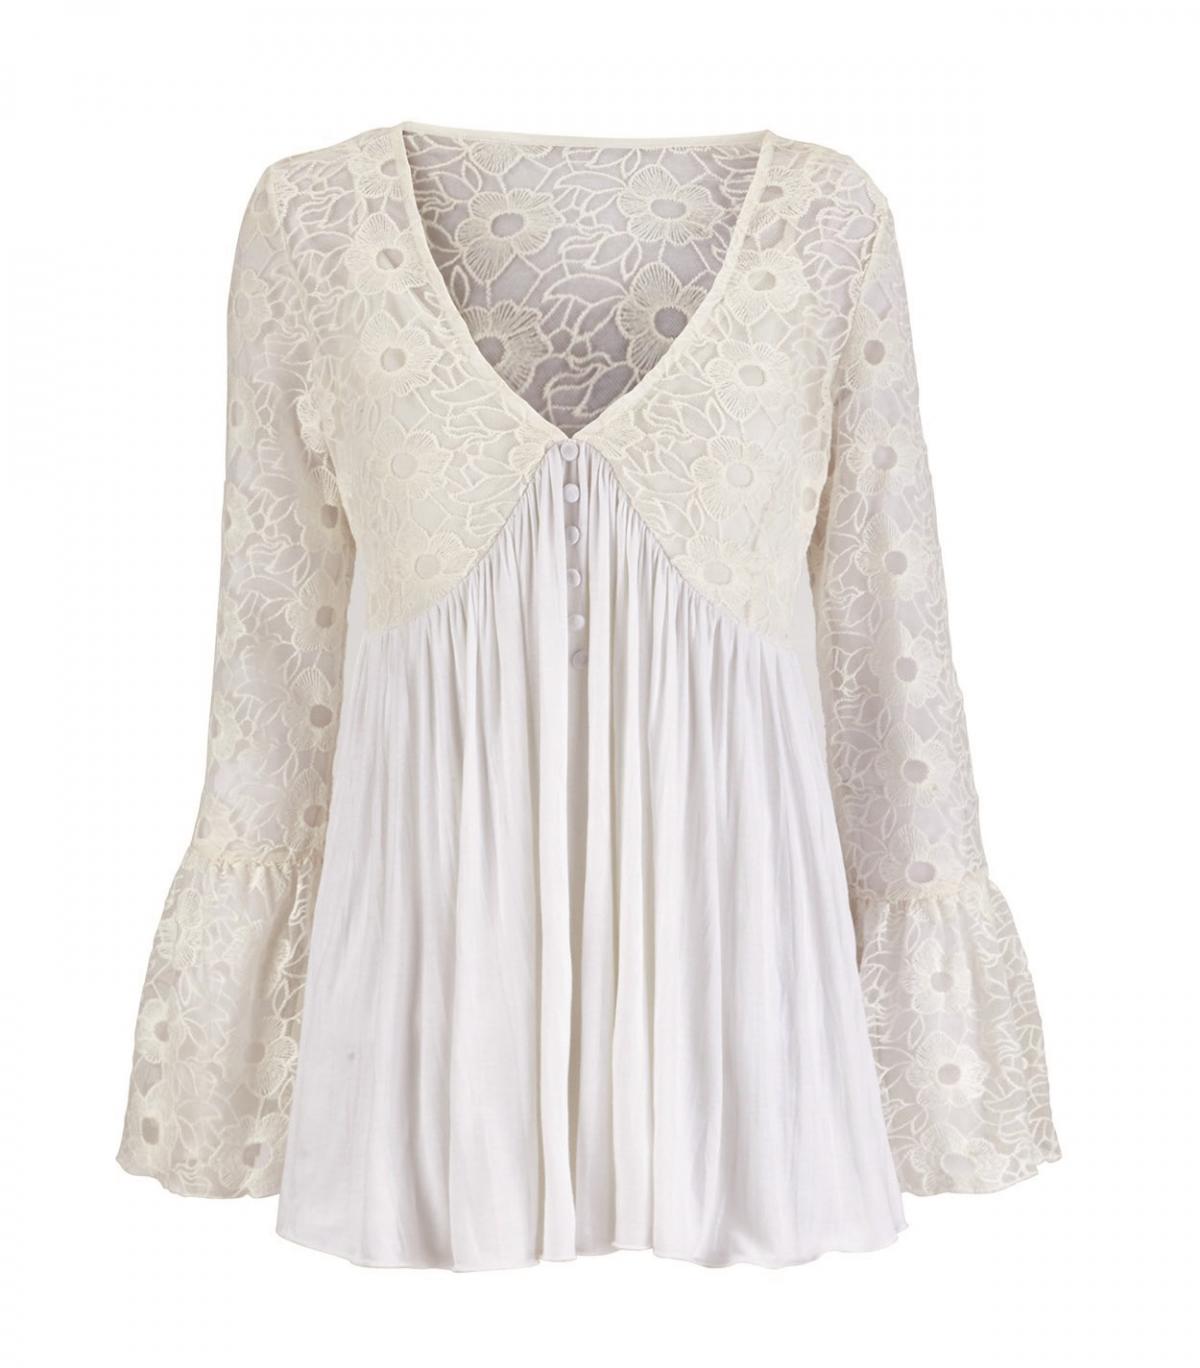 Very, Rochelle Humes Floral Lace Flute Sleeve Jersey Top, £39